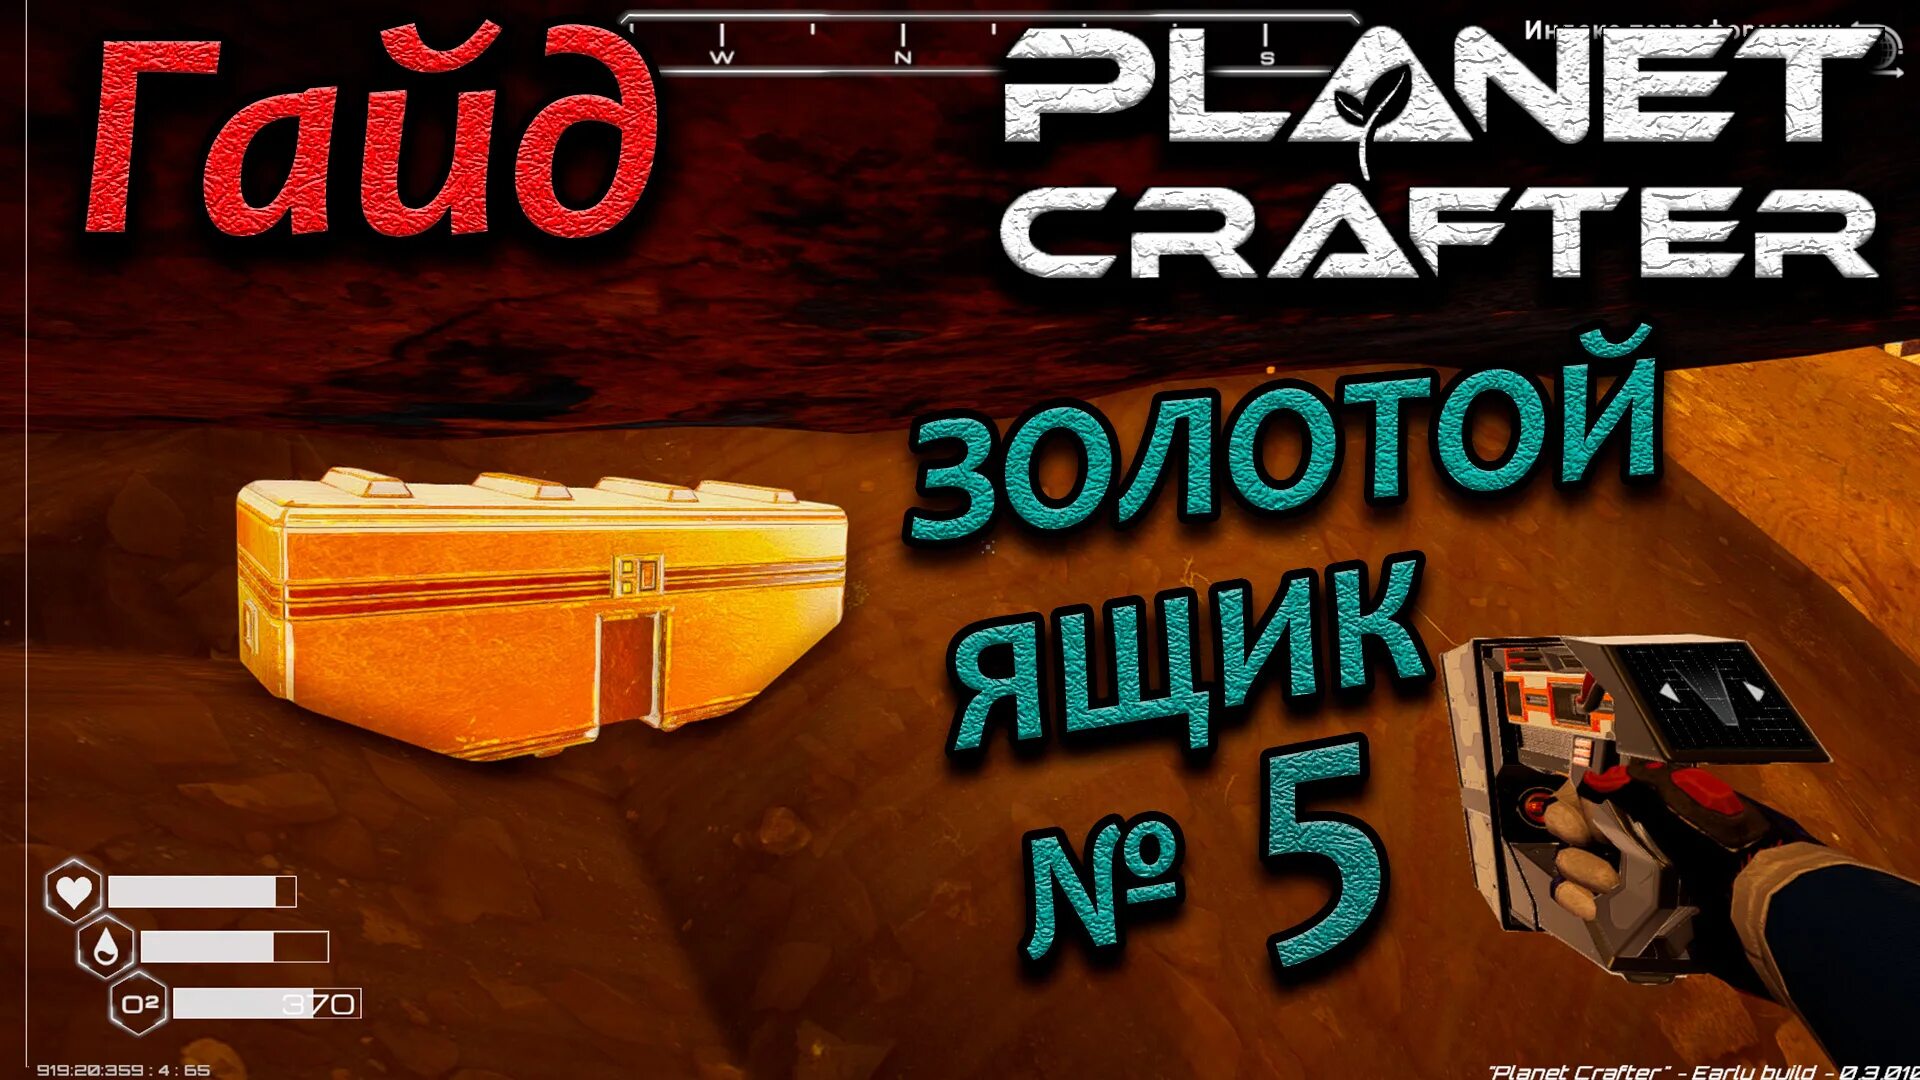 Planet crafter где уран. Planet Crafter золотые ящики. The Planet Crafter ящики. Planet Crafter моды. The Planet Crafter золотые сундуки.